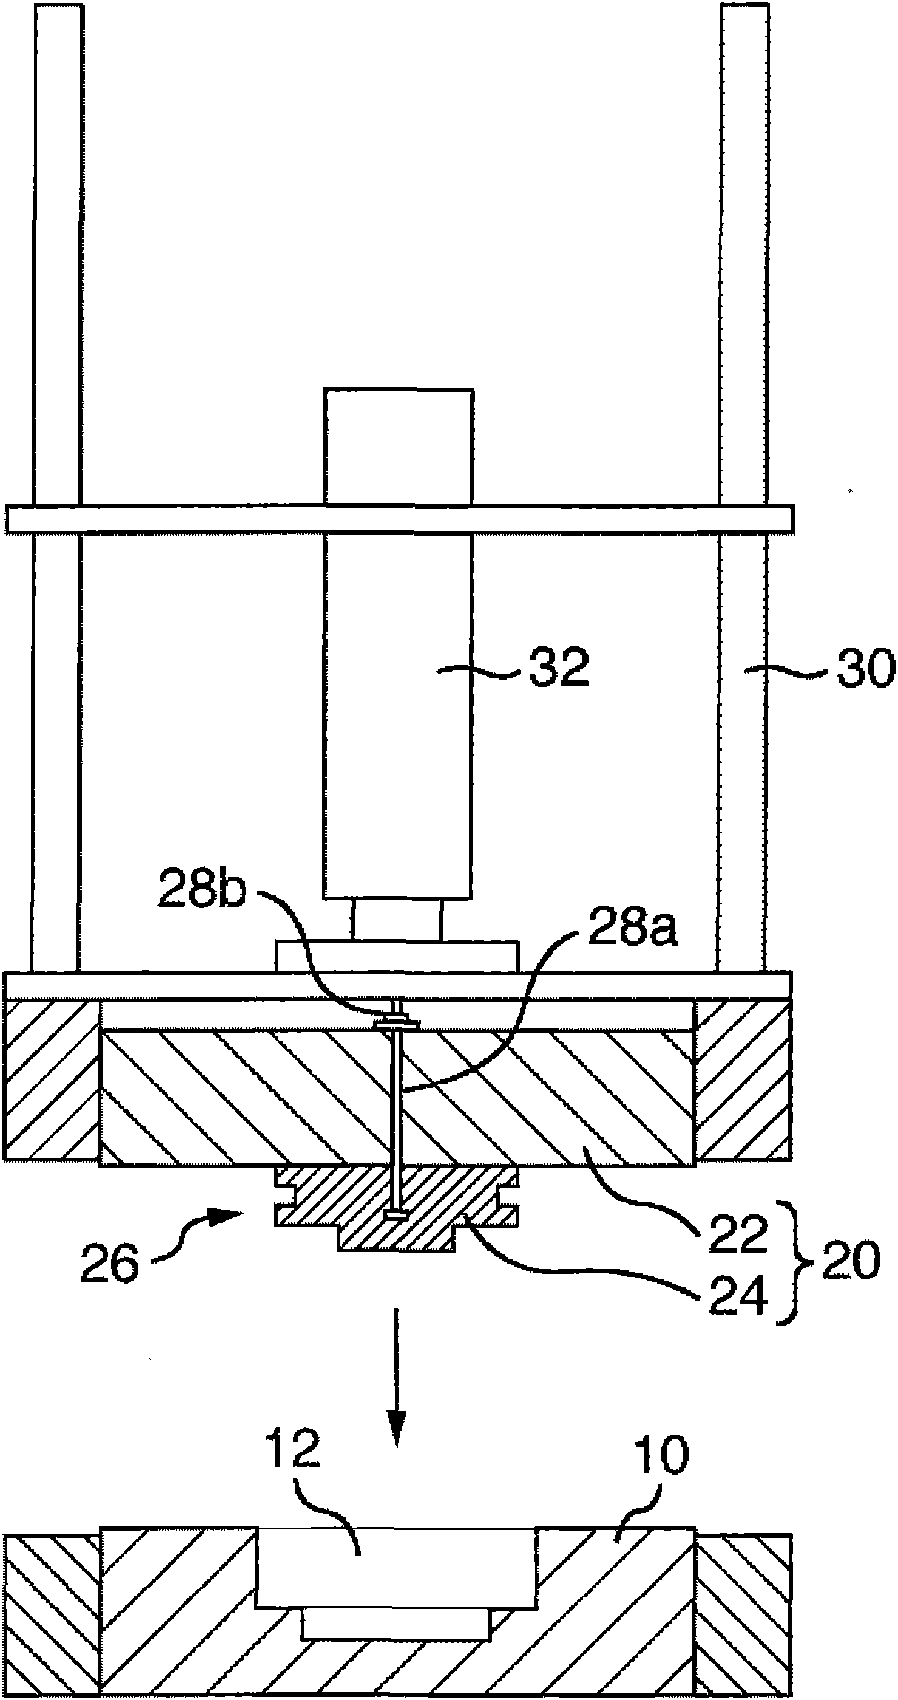 Casting method, upper mold assembly, and method for fixing core to the upper mold